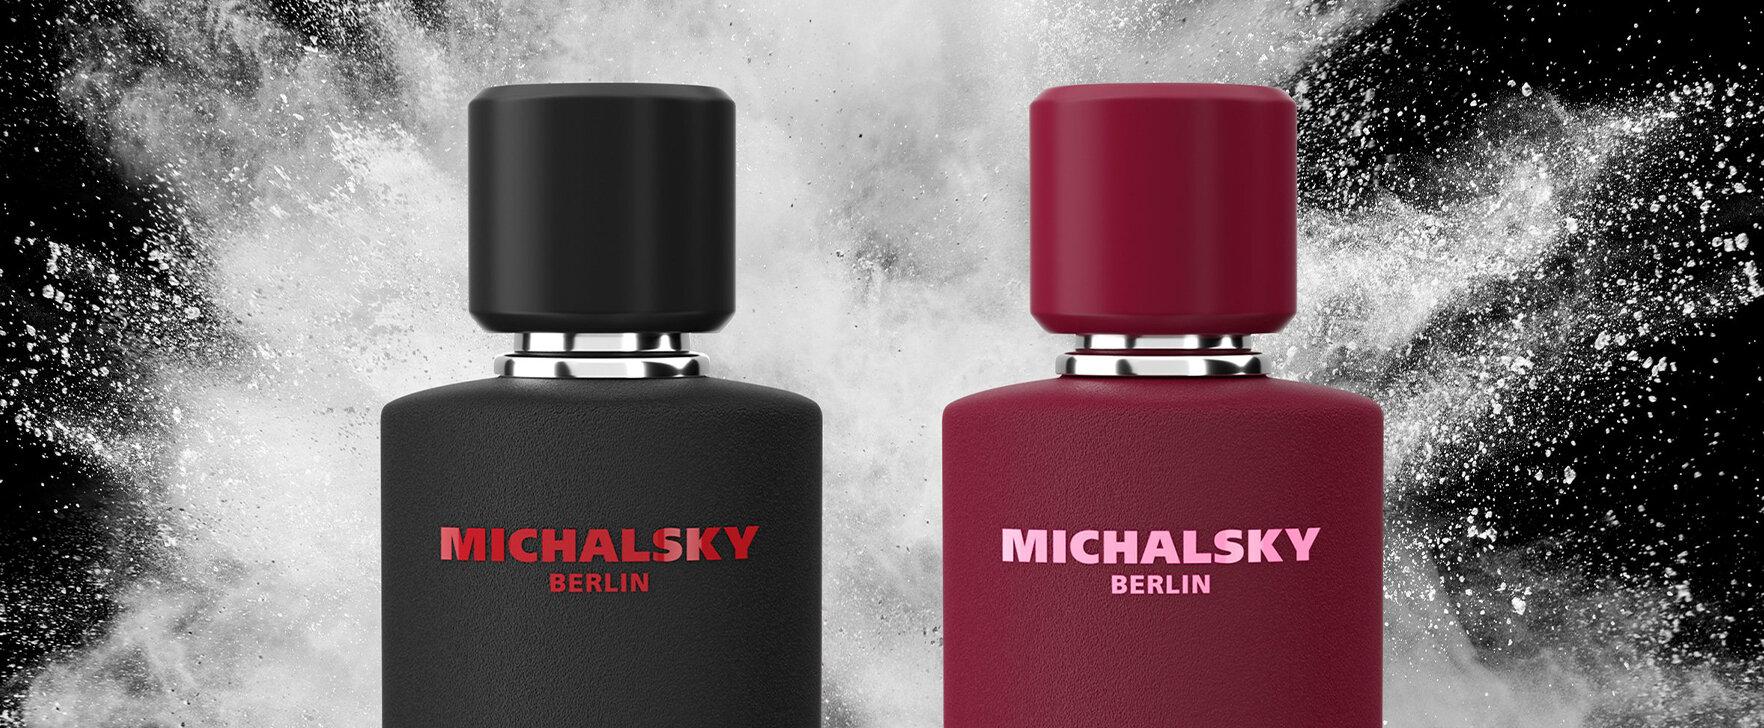 Private for Women and Private for Men: The New Michalsky Fragrance Duo